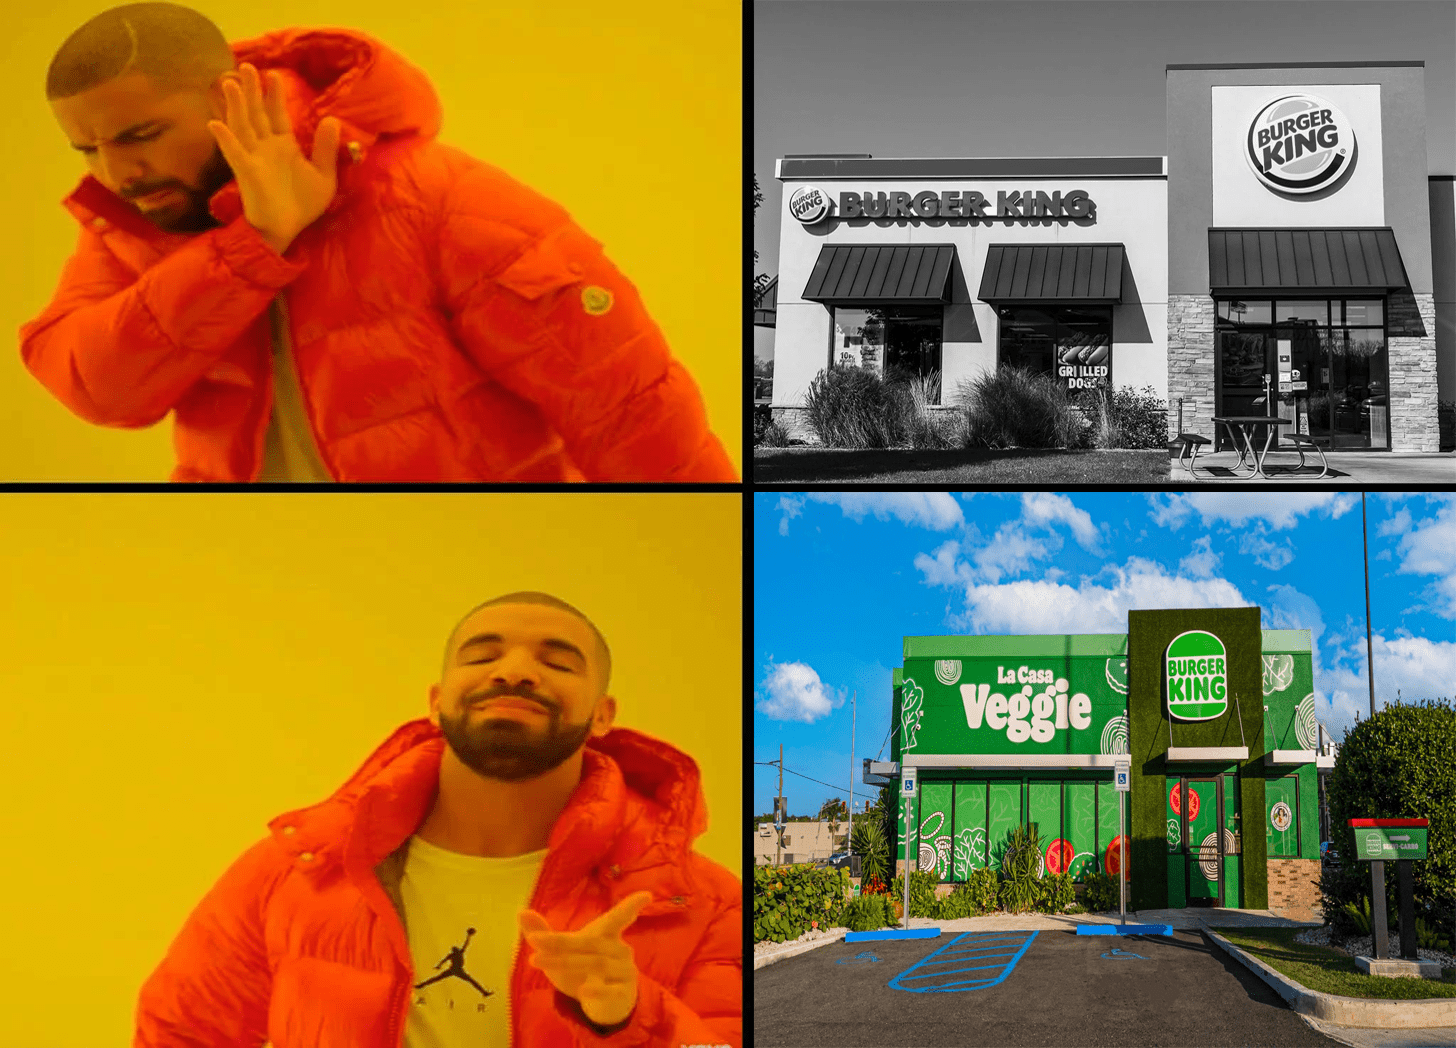 Drake wincing at an older, traditional Burger King with Drake, underneath, pointing happily at La Casa Veggie.